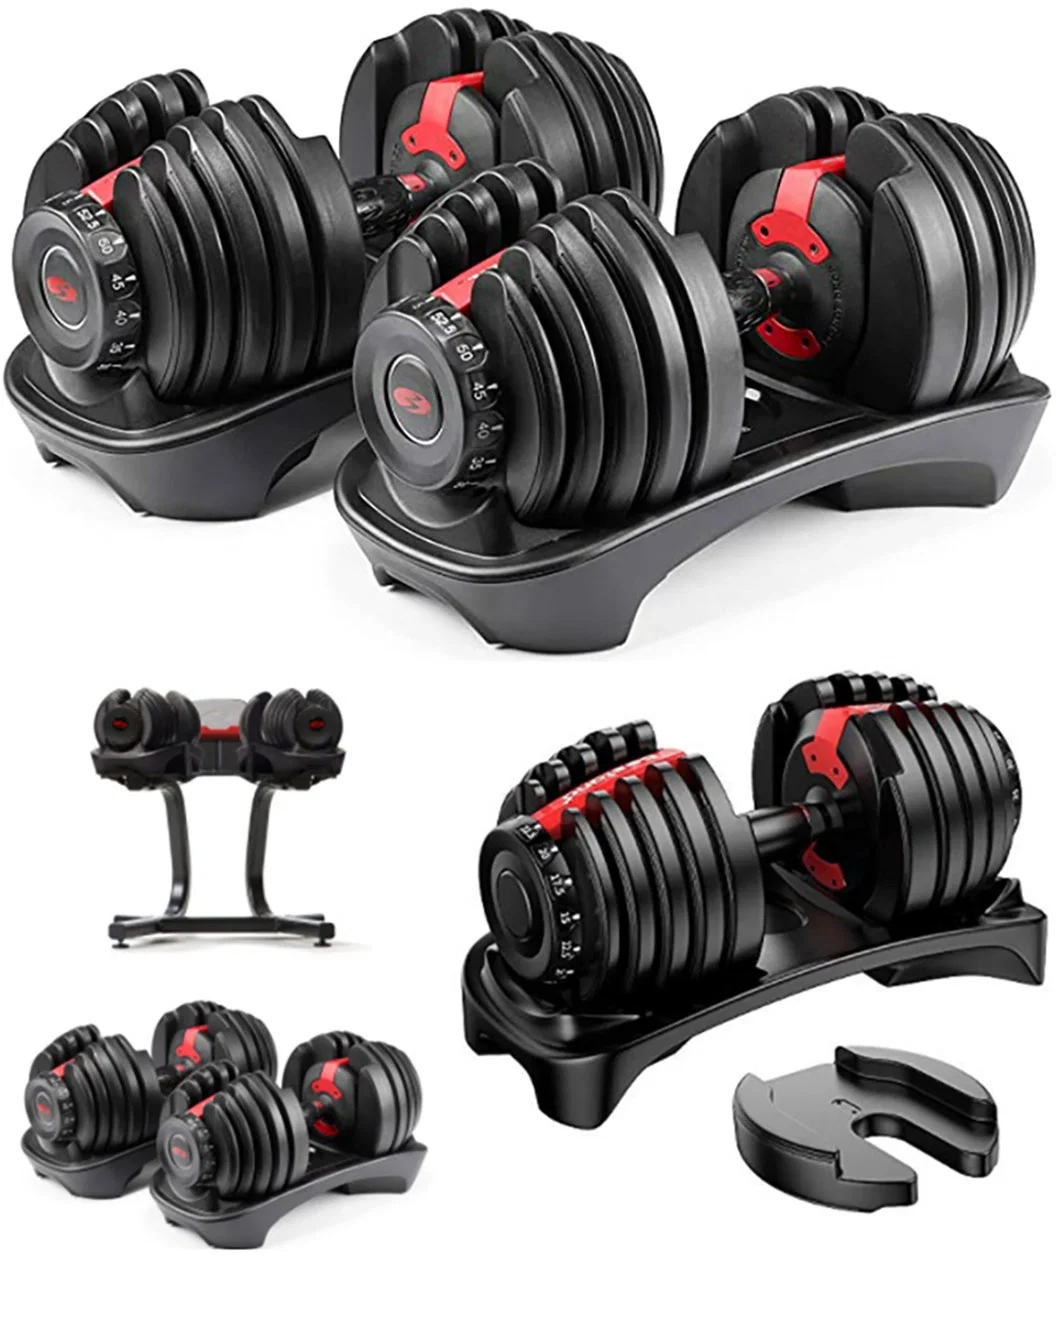 2-10 Lbs Adjustable Dumbbell That Can Fast Adjust Weights Quickly for Men and Women